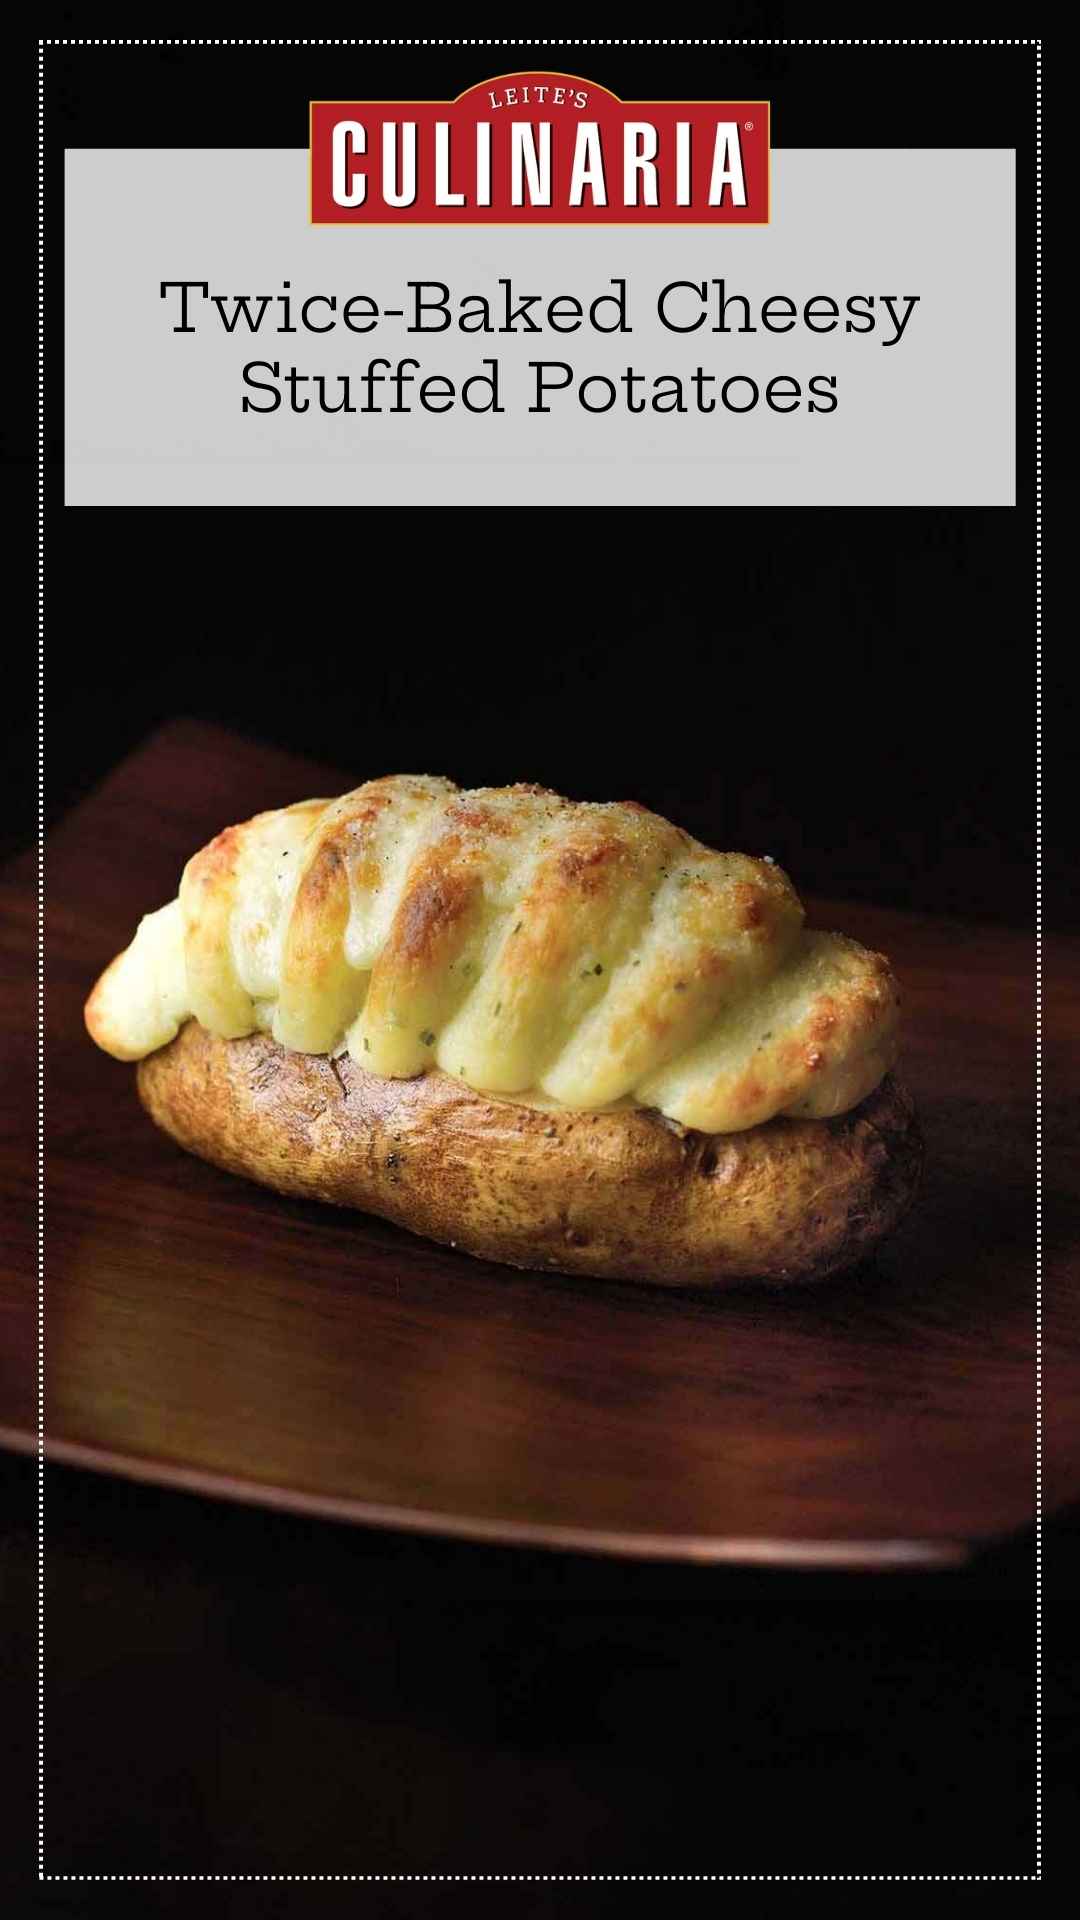 A baked potato stuffed with mashed potato and cheddar stuffing piped into it.